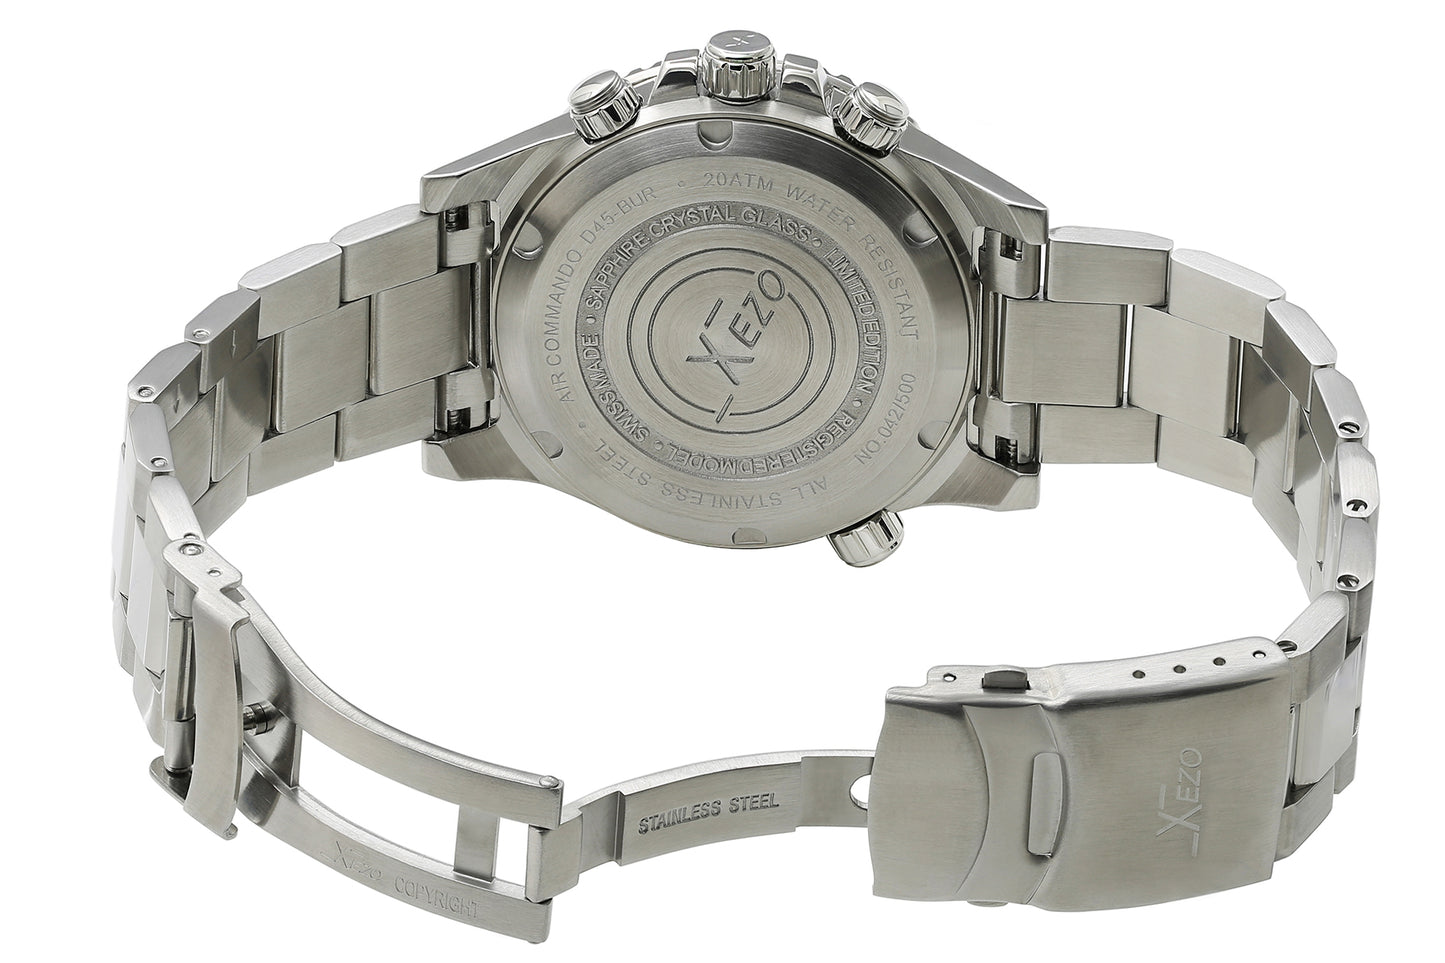 Xezo - Overview of the back of the Air Commando D45-BUR watch